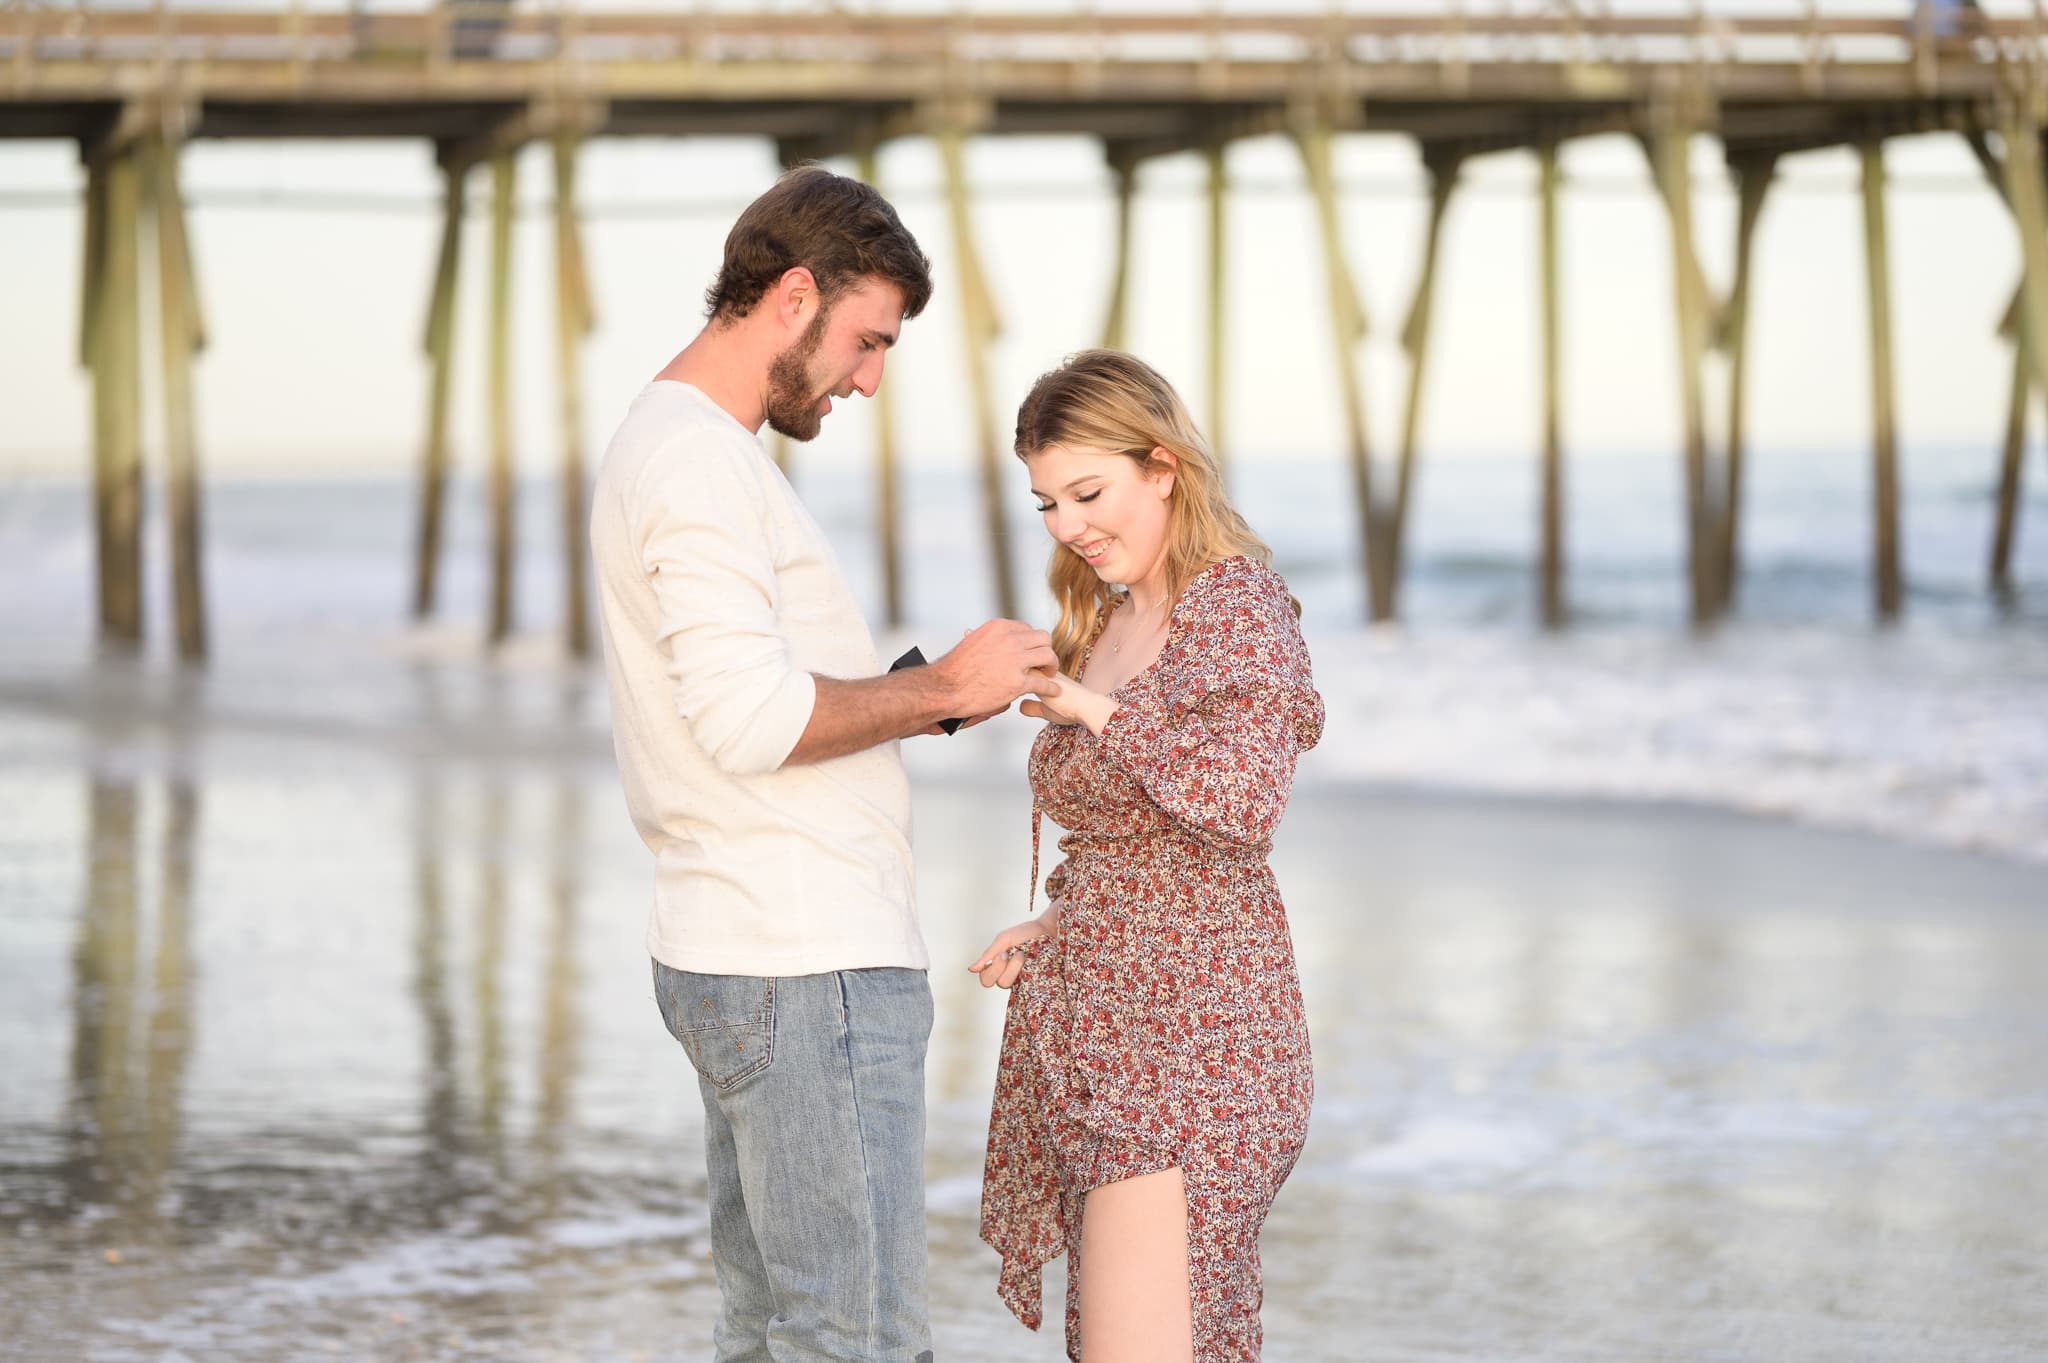 Getting down on a knee for surprise proposal by the pier - Myrtle Beach State Park